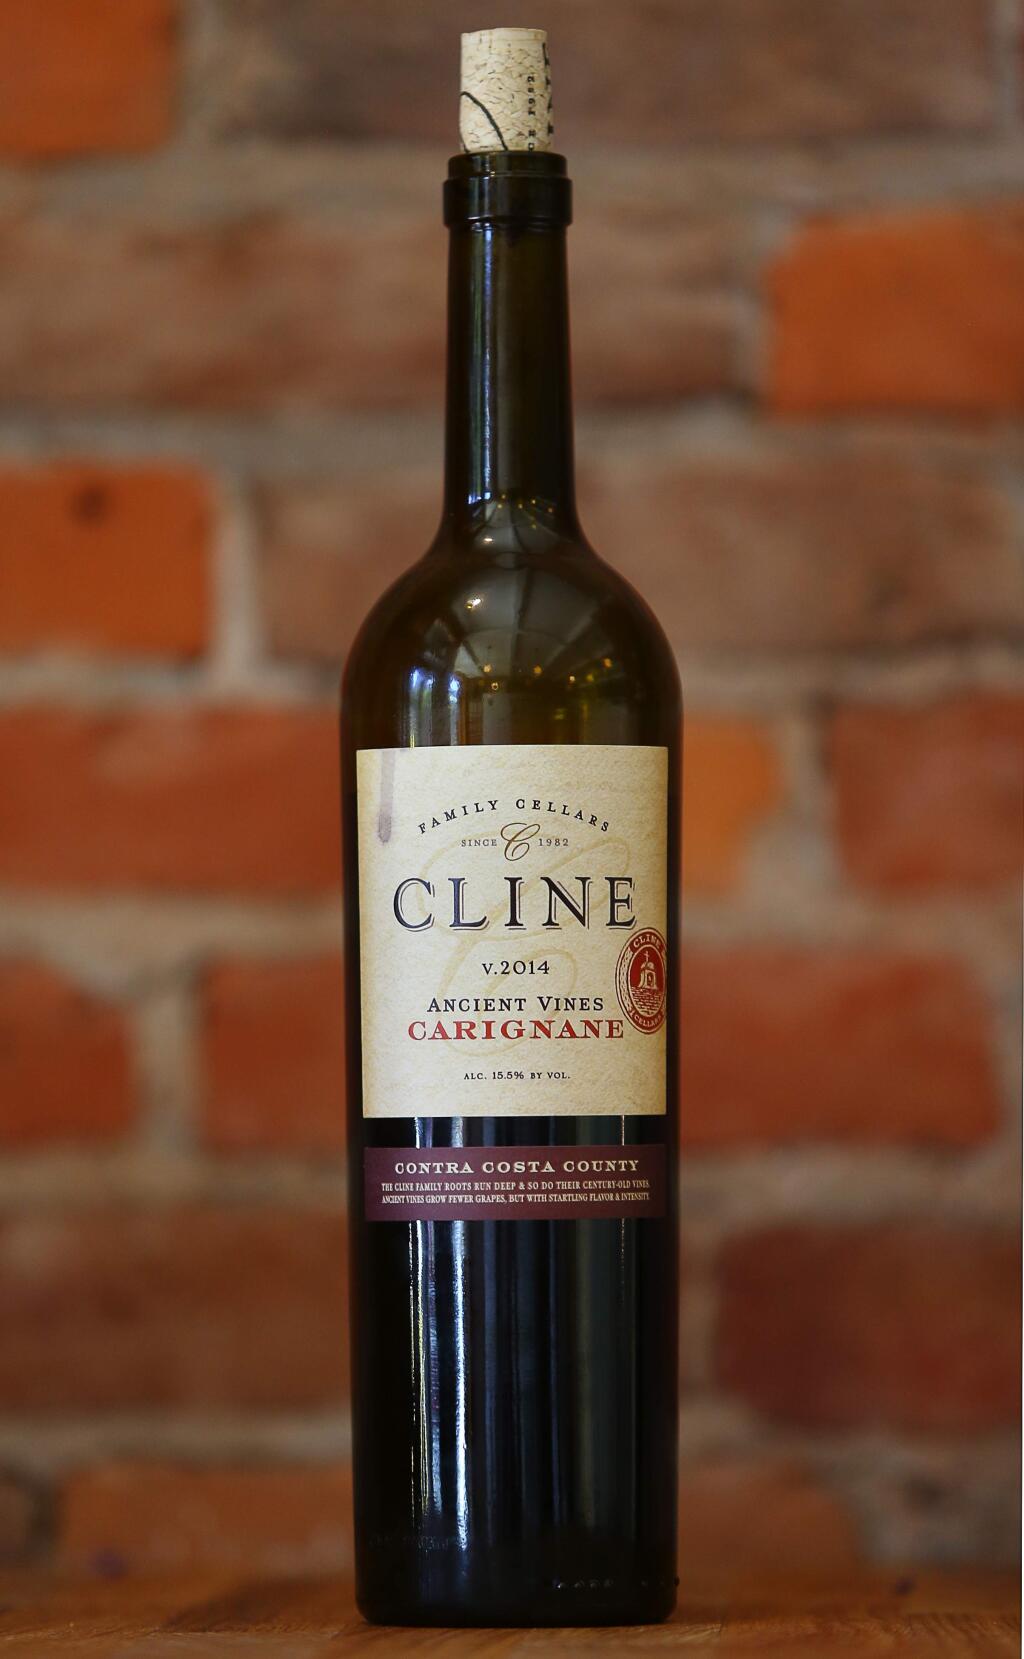 Bottle of Cline Family Cellars 2014 Carignane.(Christopher Chung/ The Press Democrat)